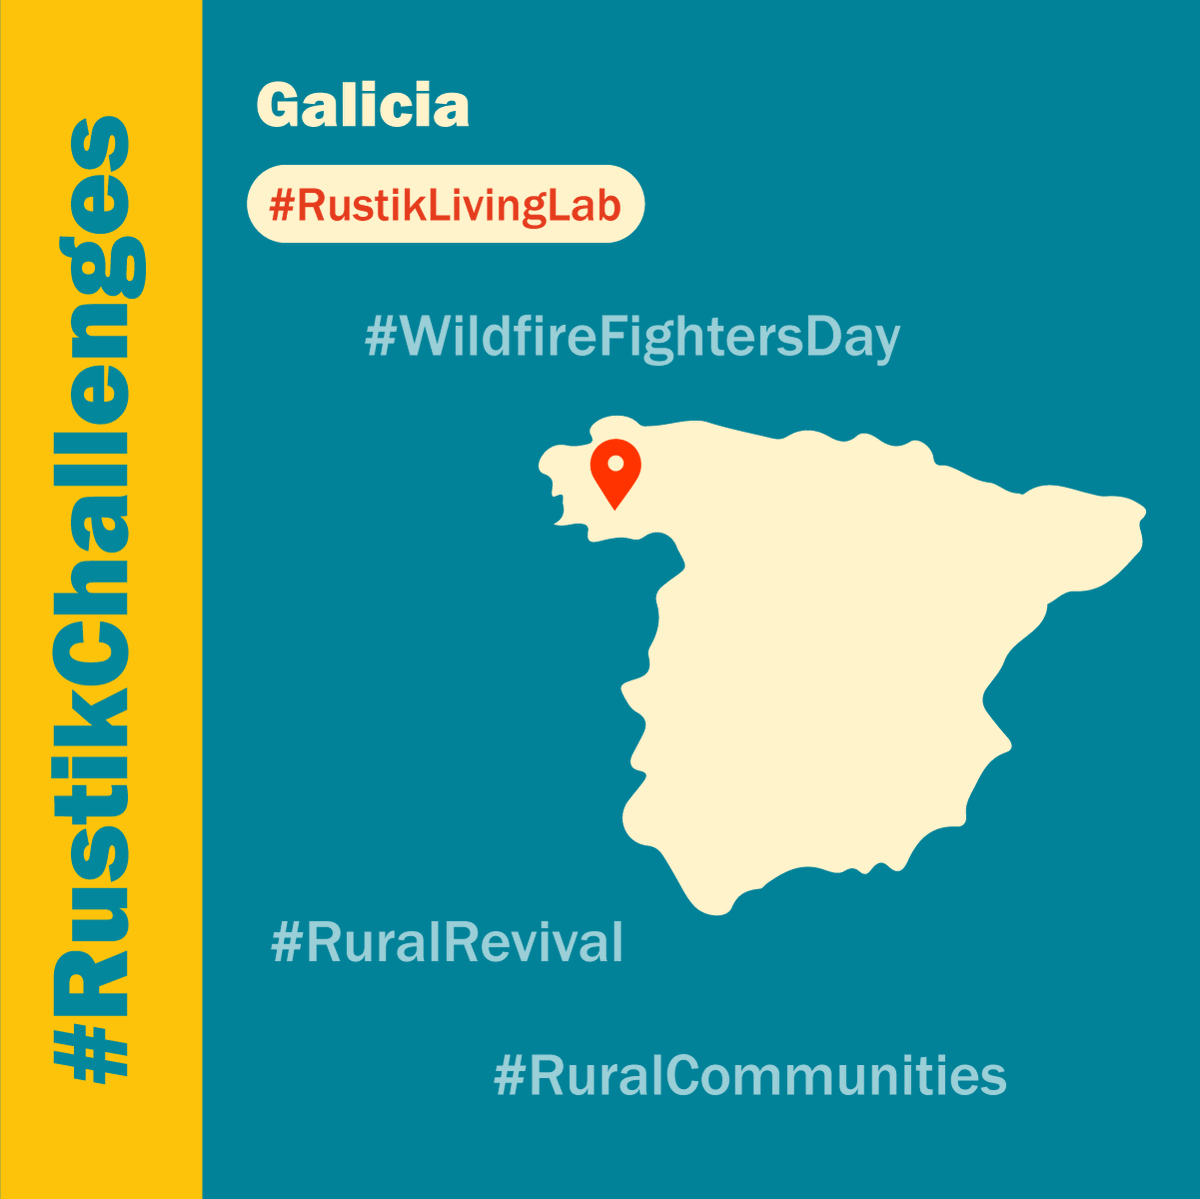 #RustikChallenges
Galicia pioneers #RuralRevival 🔥 amidst #wildfire risks, tackling land fragmentation for sustainable development. On #InternationalFirefightersDay, let's honor their efforts to protect communities and ecosystems!
Check out the #LivingLab n9.cl/jzdp93